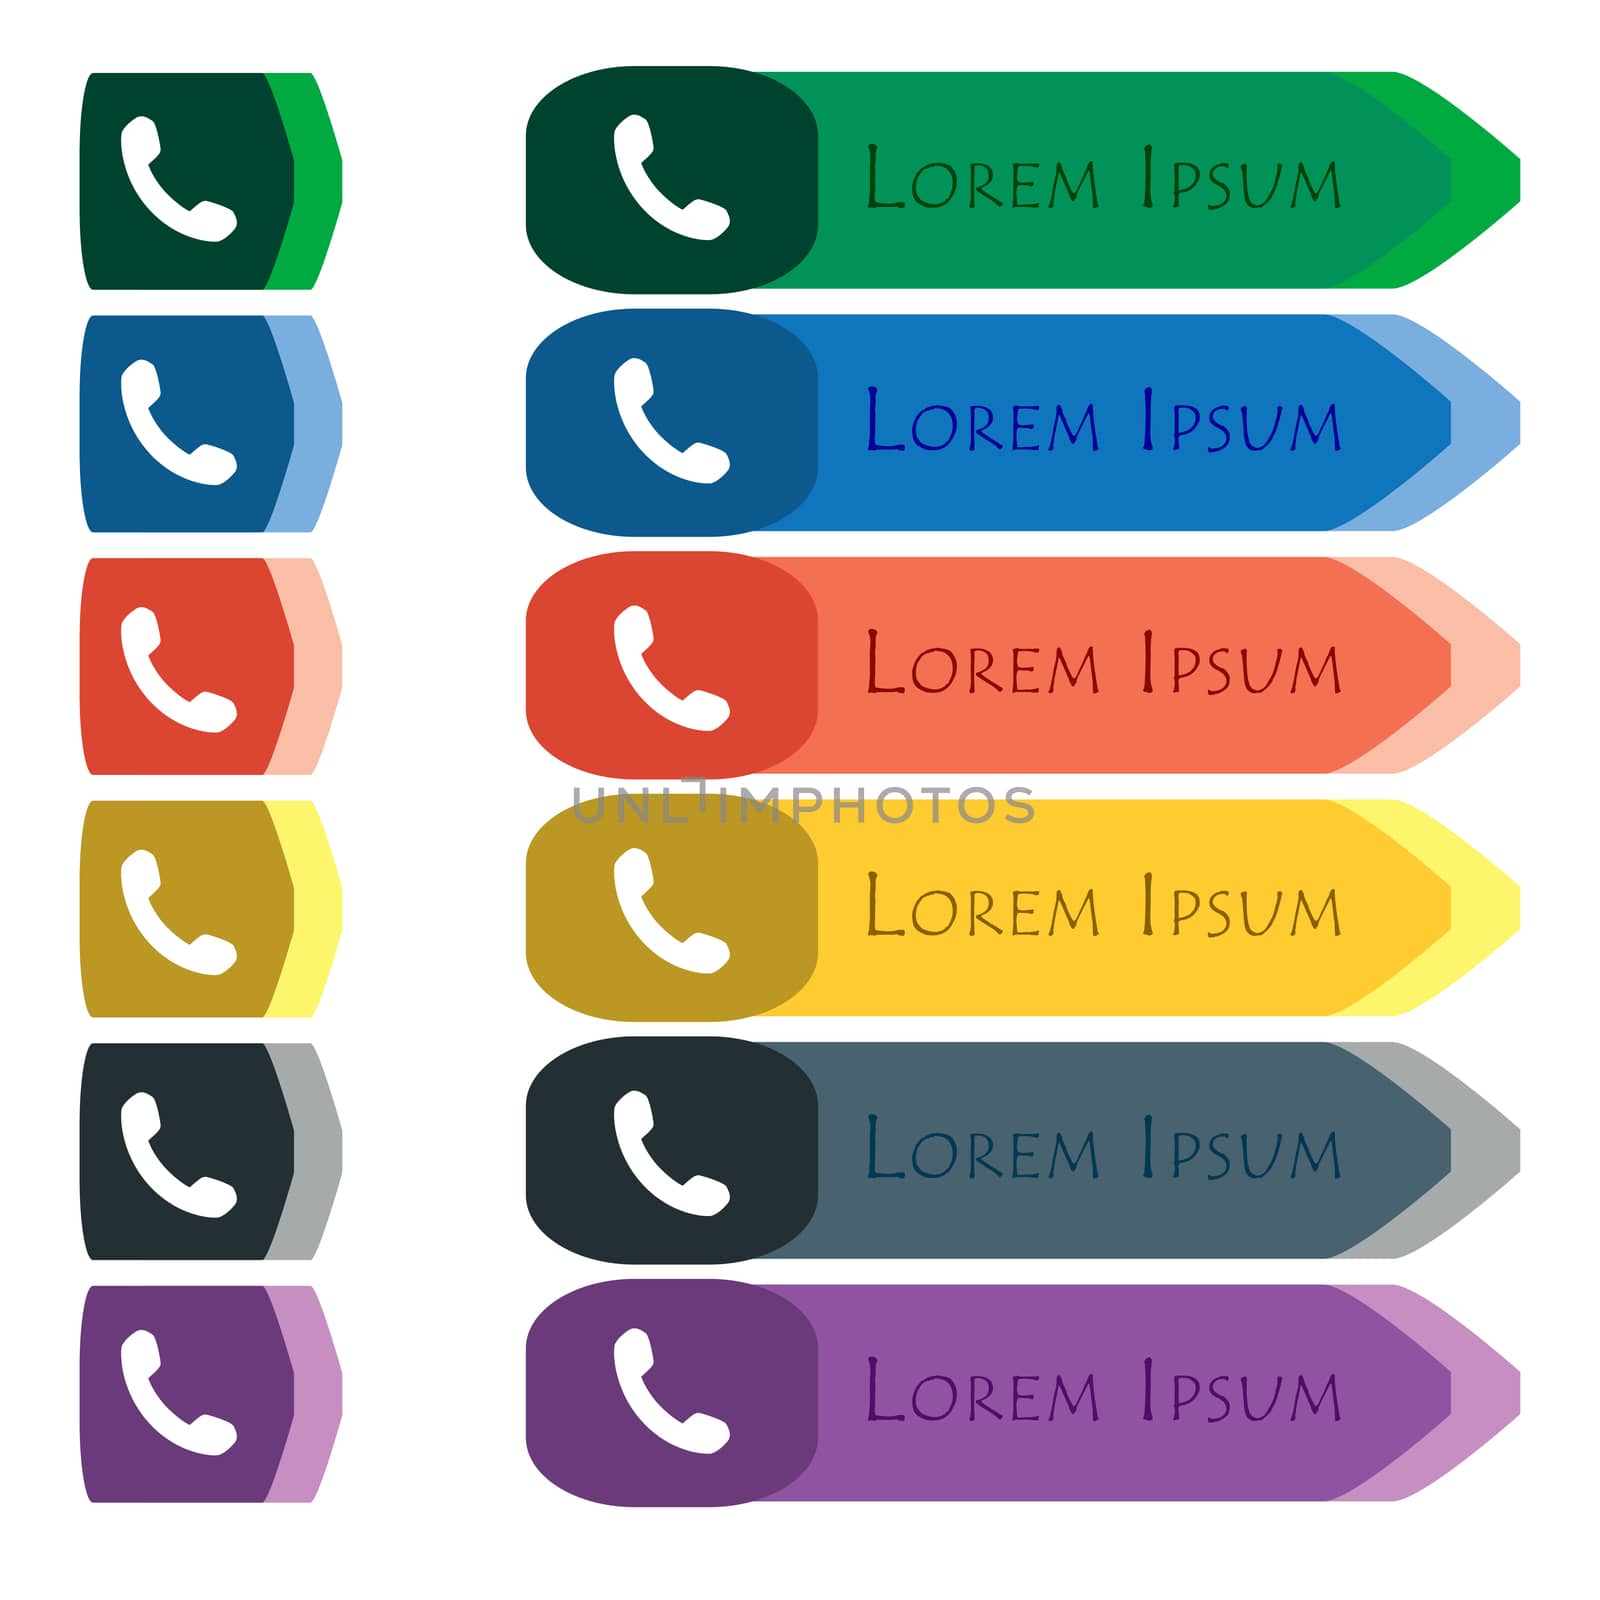 Phone, Support, Call center icon sign. Set of colorful, bright long buttons with additional small modules. Flat design. 